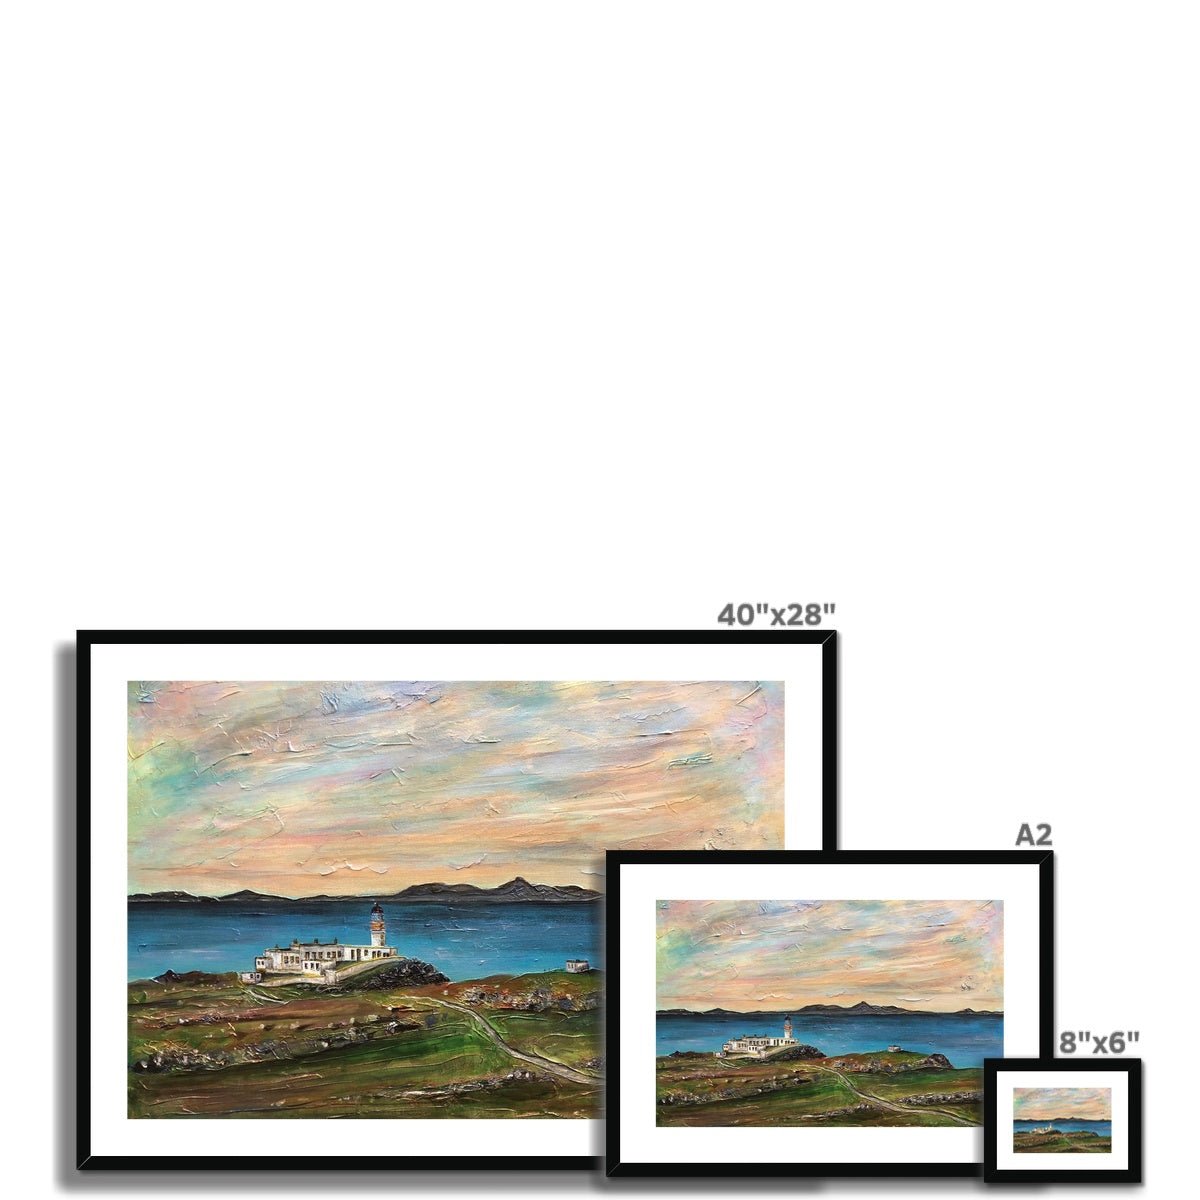 Neist Point Skye Painting | Framed & Mounted Prints From Scotland-Framed & Mounted Prints-Skye Art Gallery-Paintings, Prints, Homeware, Art Gifts From Scotland By Scottish Artist Kevin Hunter